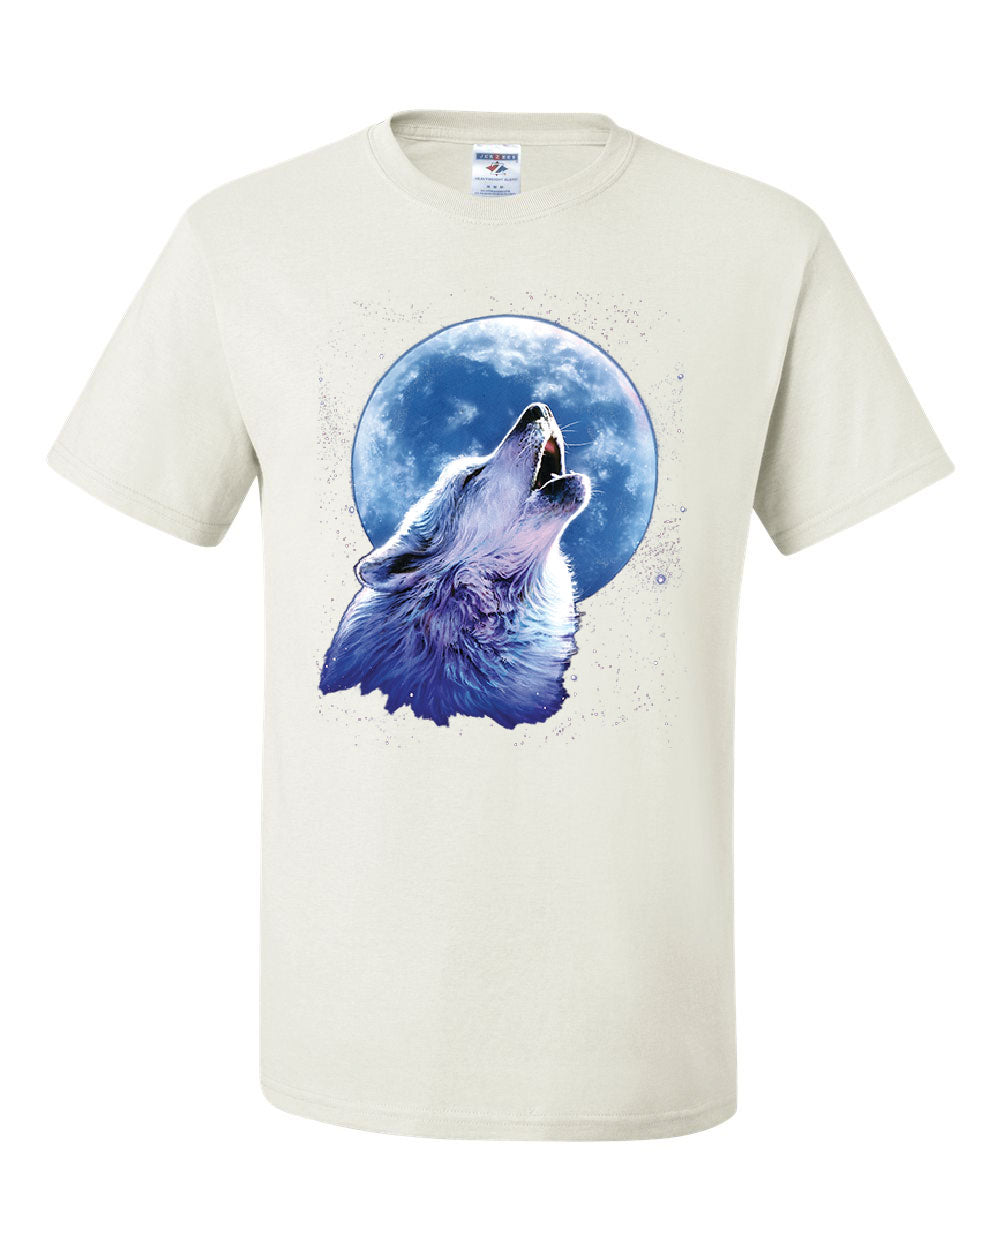 Call of the Wild T-Shirt Lone Wolf Howling at the Moon Wildlife Tee ...